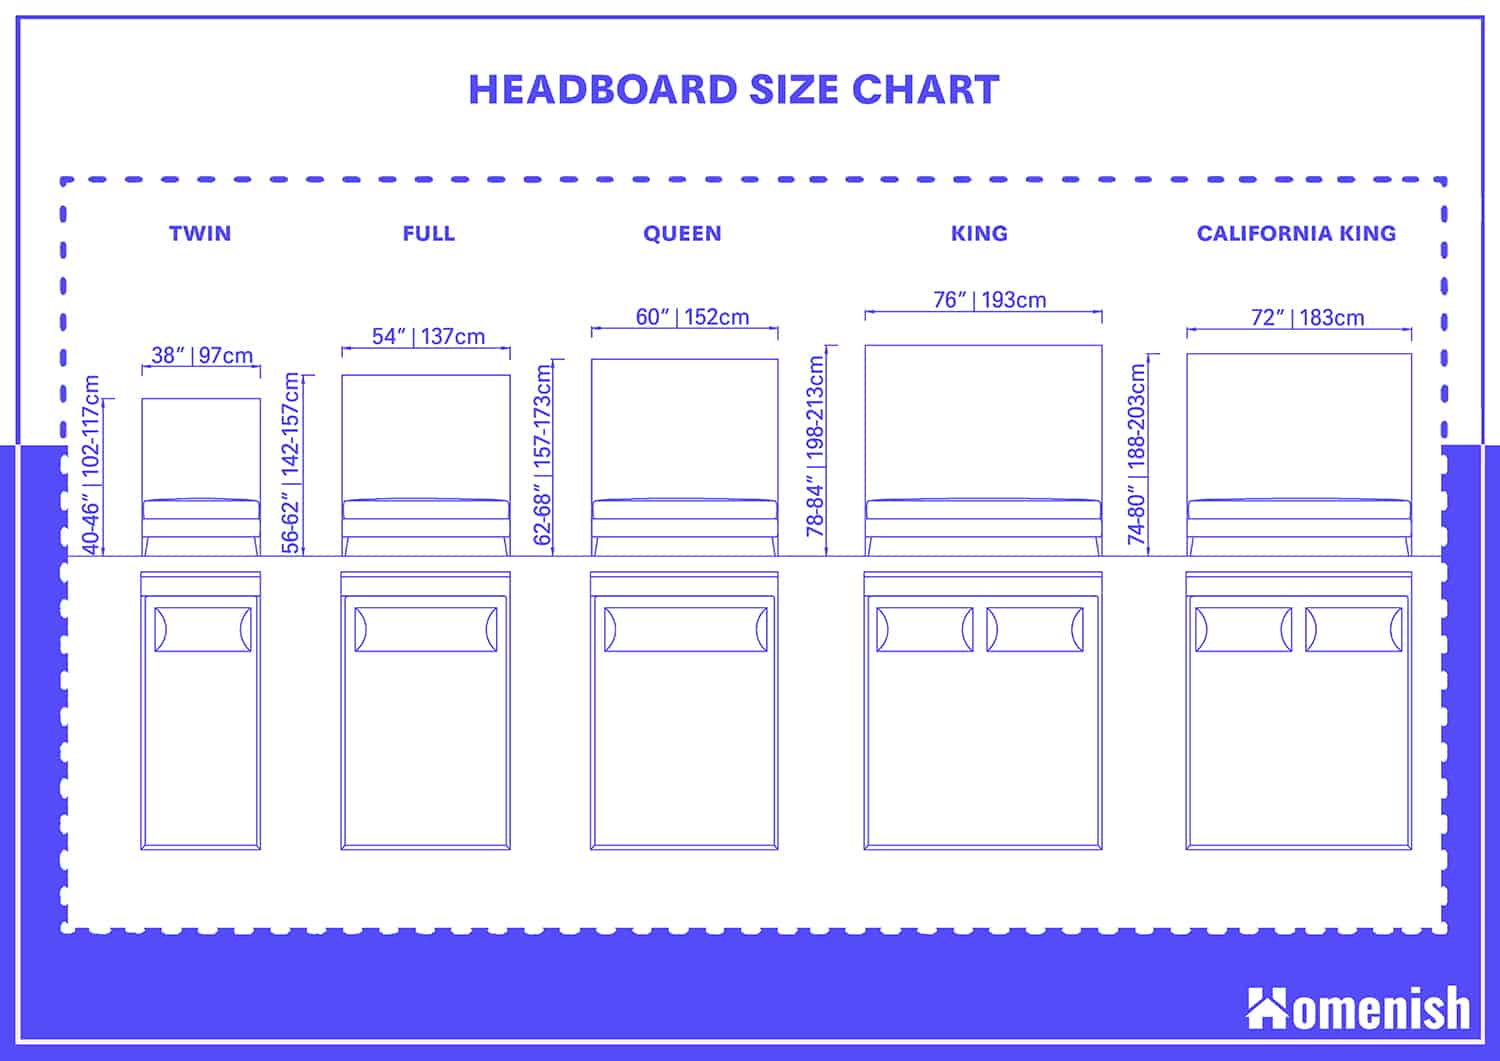 Headboard Size Chart For Different Types of Beds